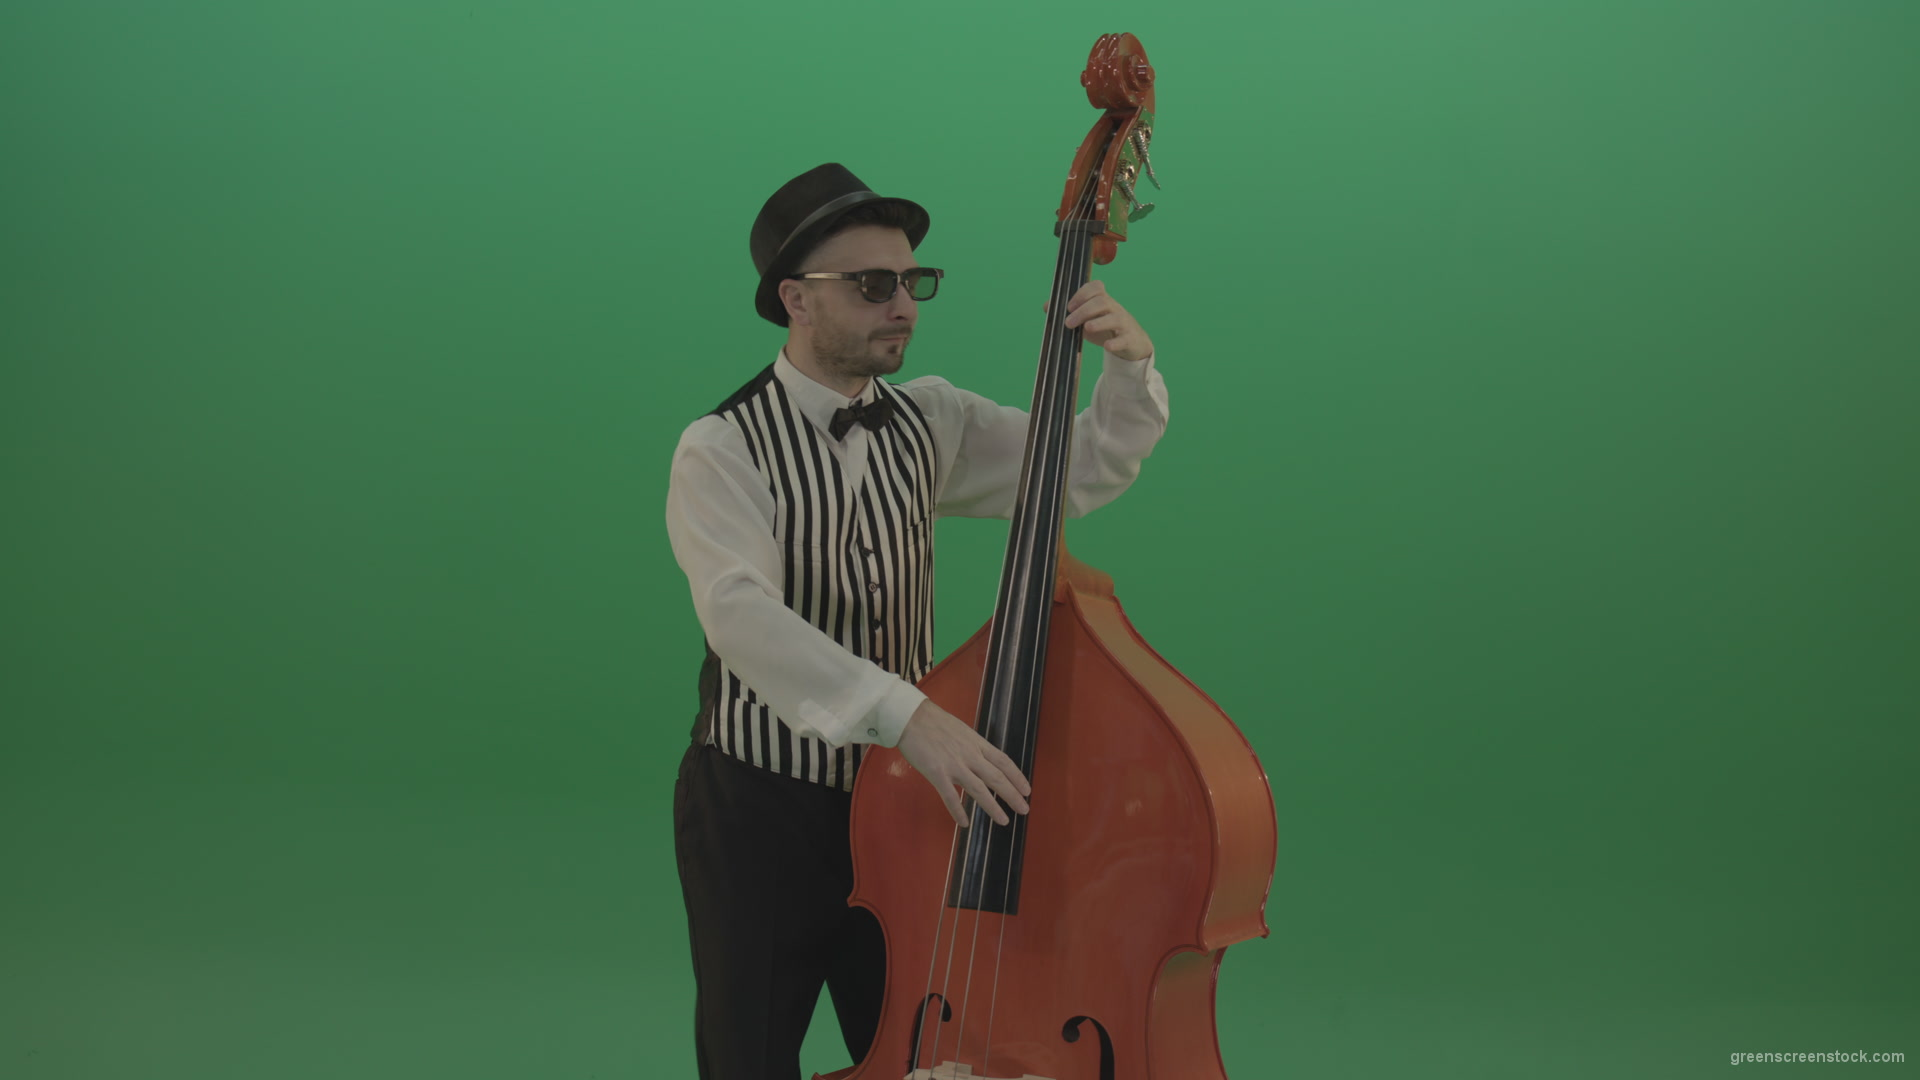 Virtuoso-man-playing-jazz-on-double-bass-String-music-instrument-isolated-on-green-screen_006 Green Screen Stock